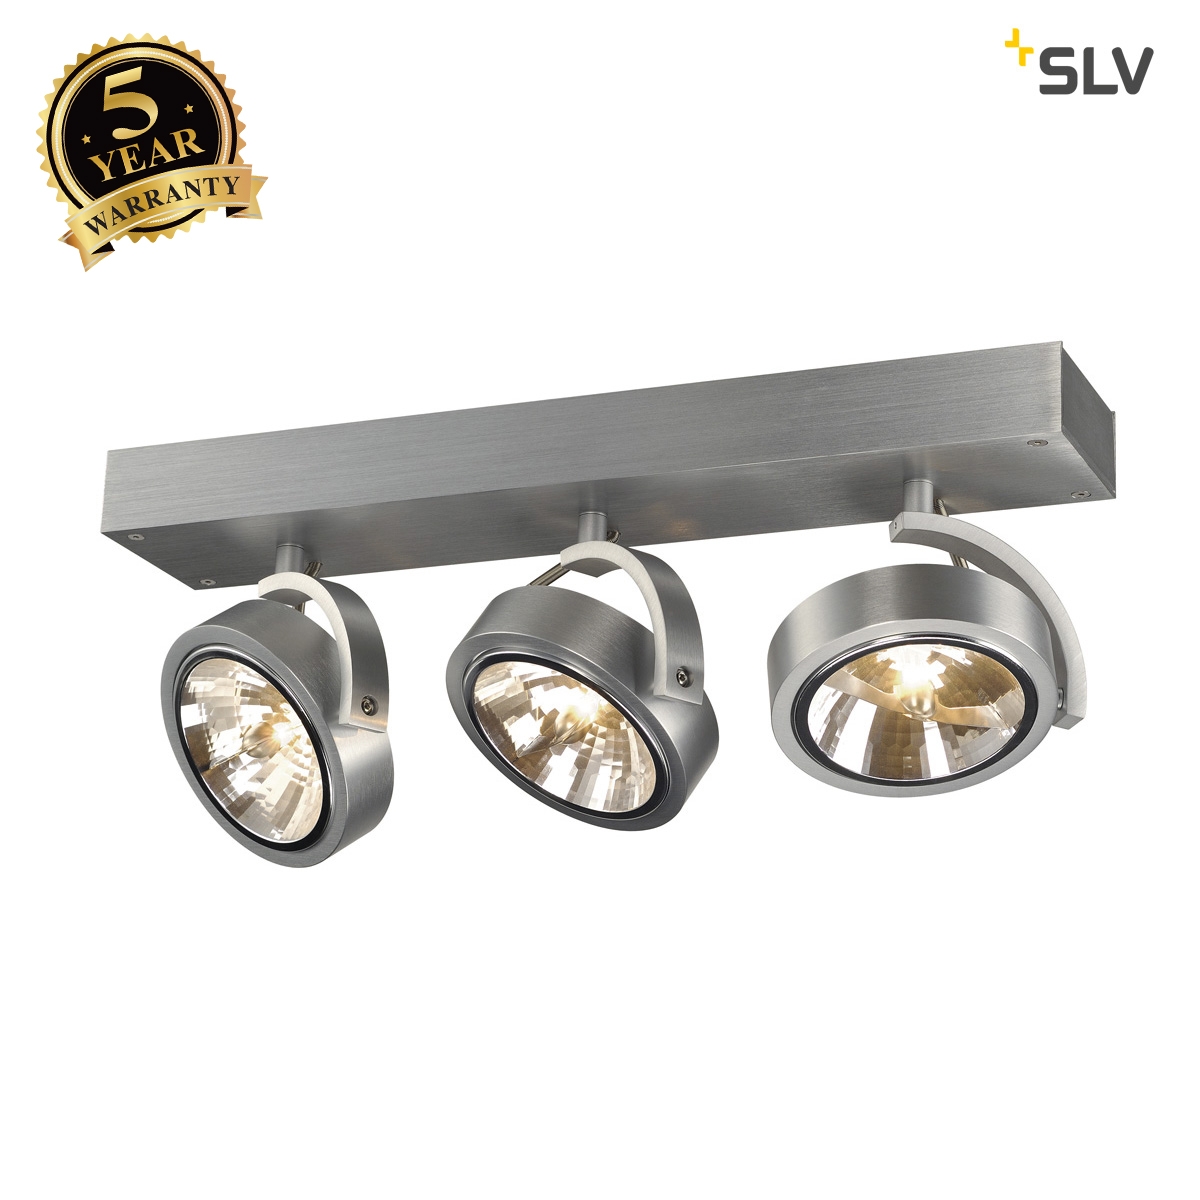 SLV KALU 3 wall and ceiling light, alu brushed, 3x QRB111, max. 3x 50W 147276